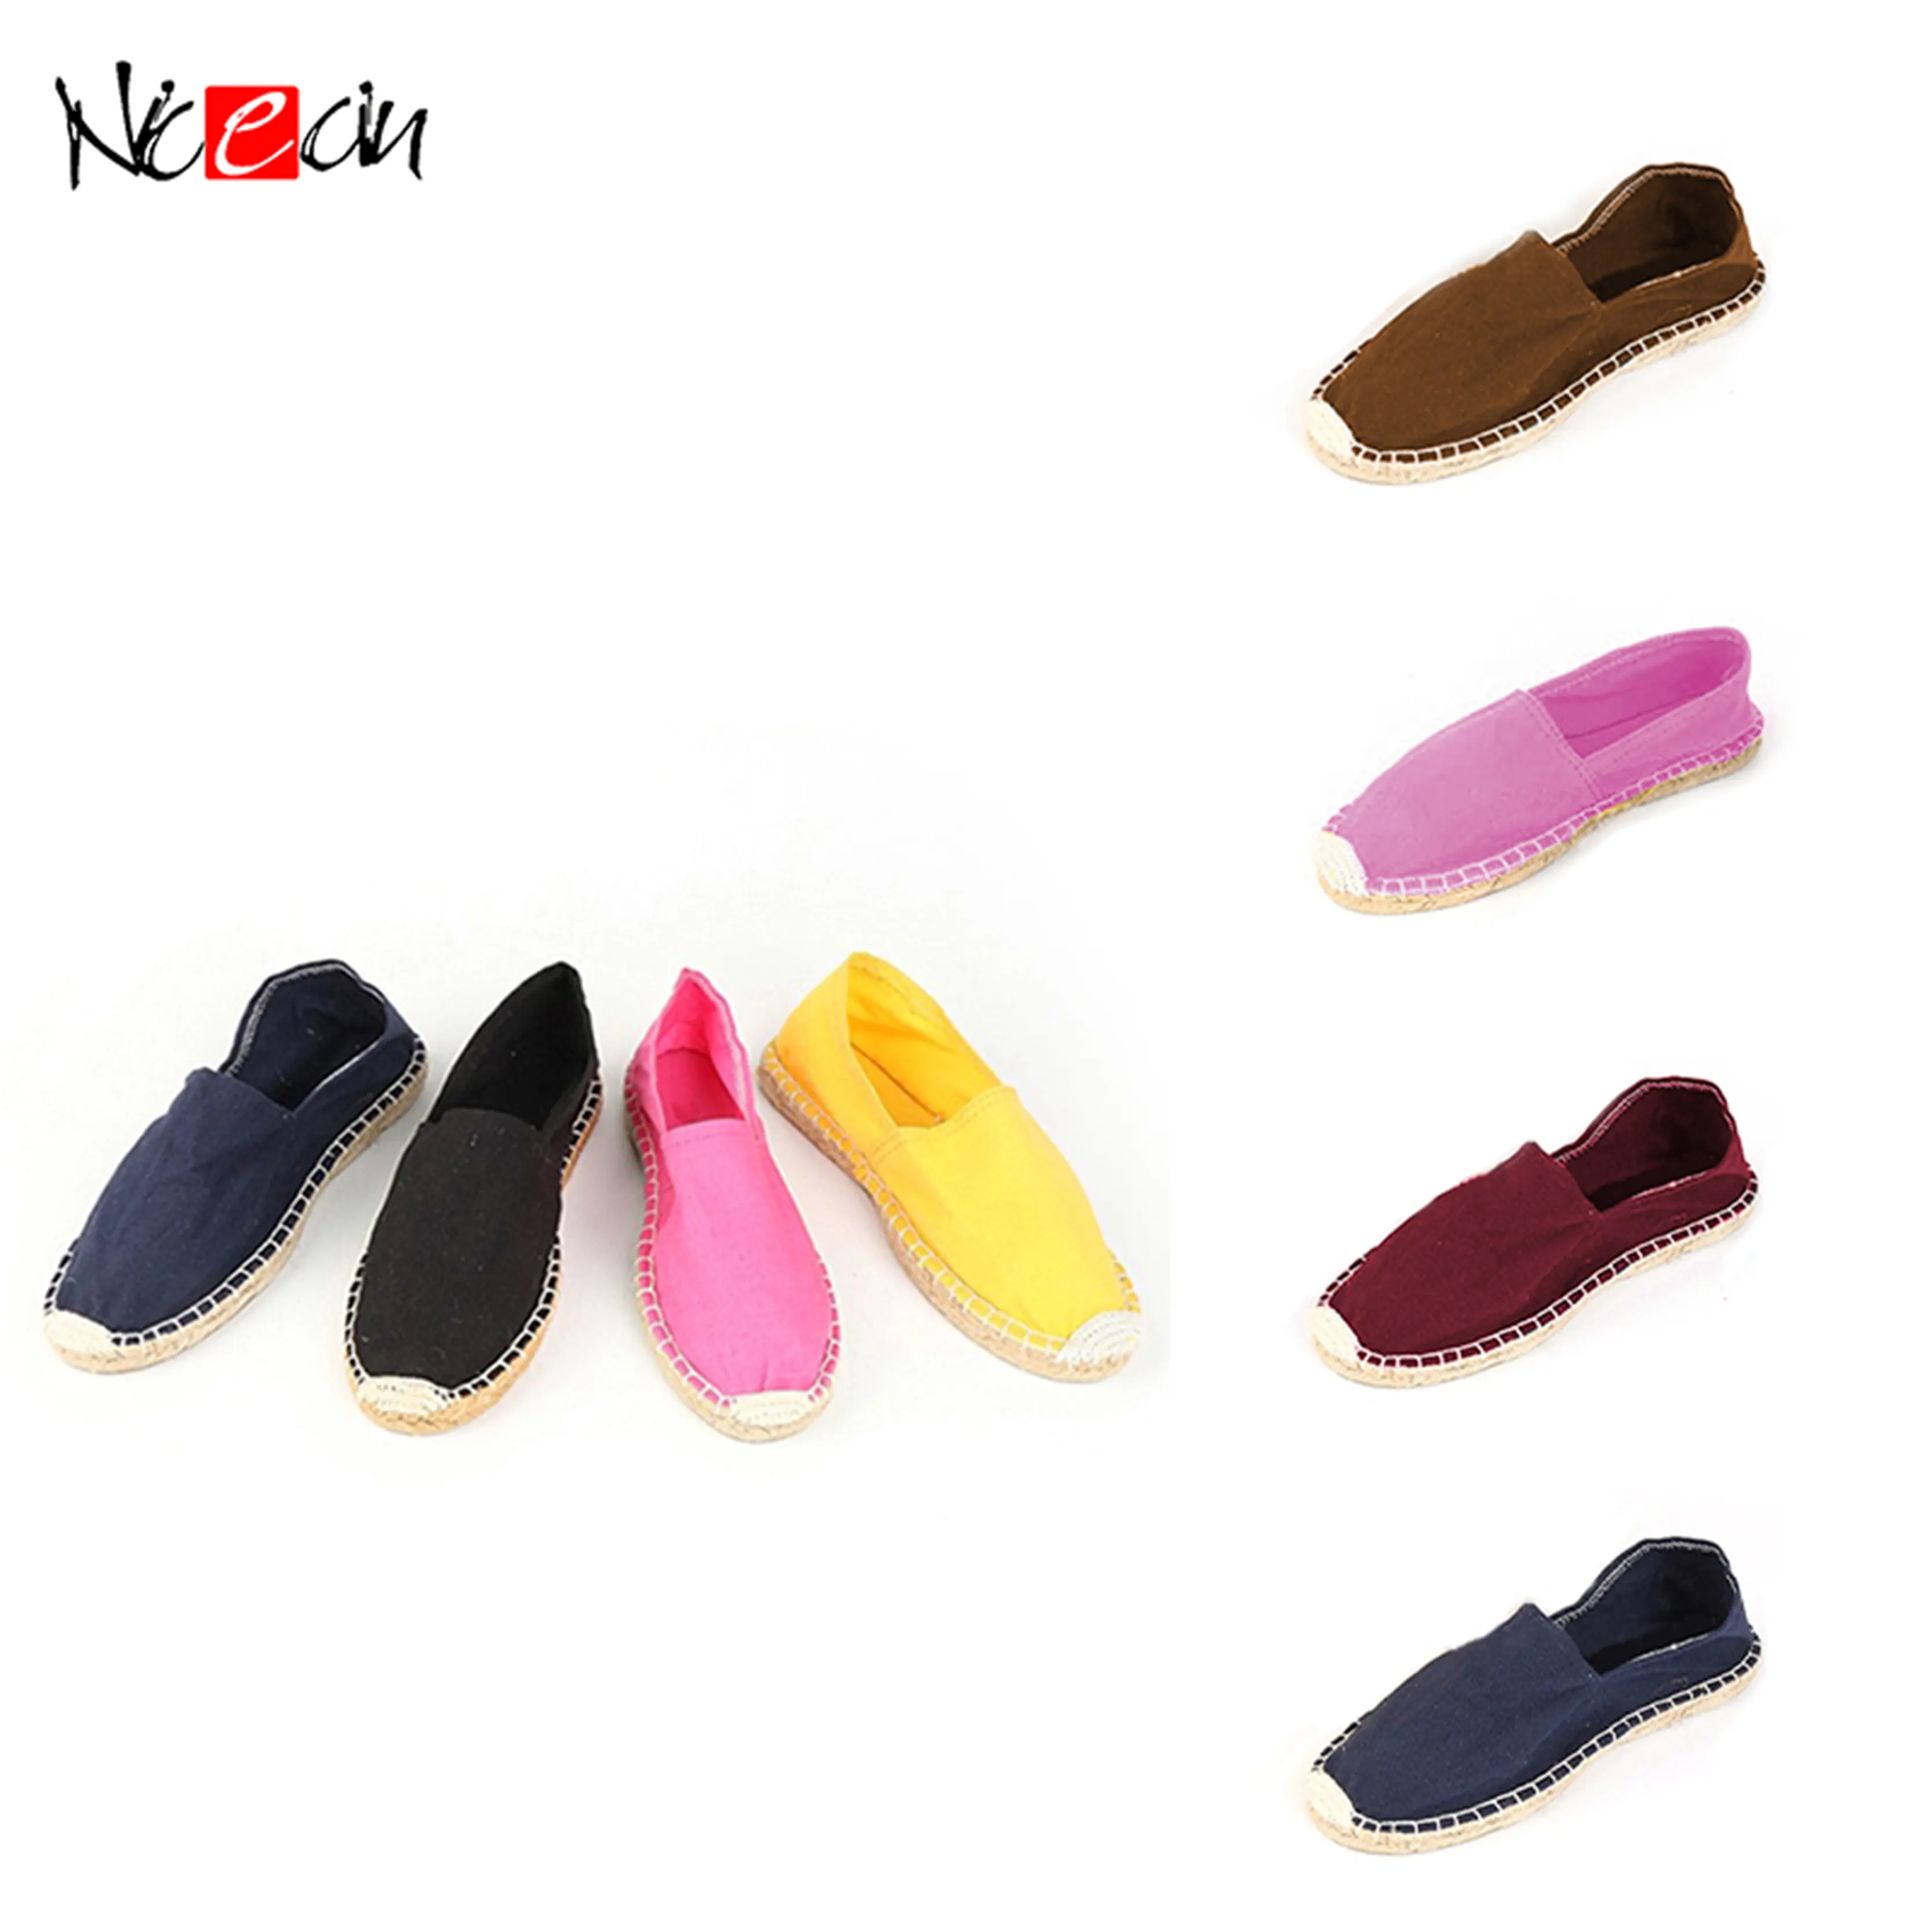 Nicecin Unisex Colored Custom Slip On Canvas Jute Shoe For Men For Classic Newest Selling Canvas Espadrille zapato mujer